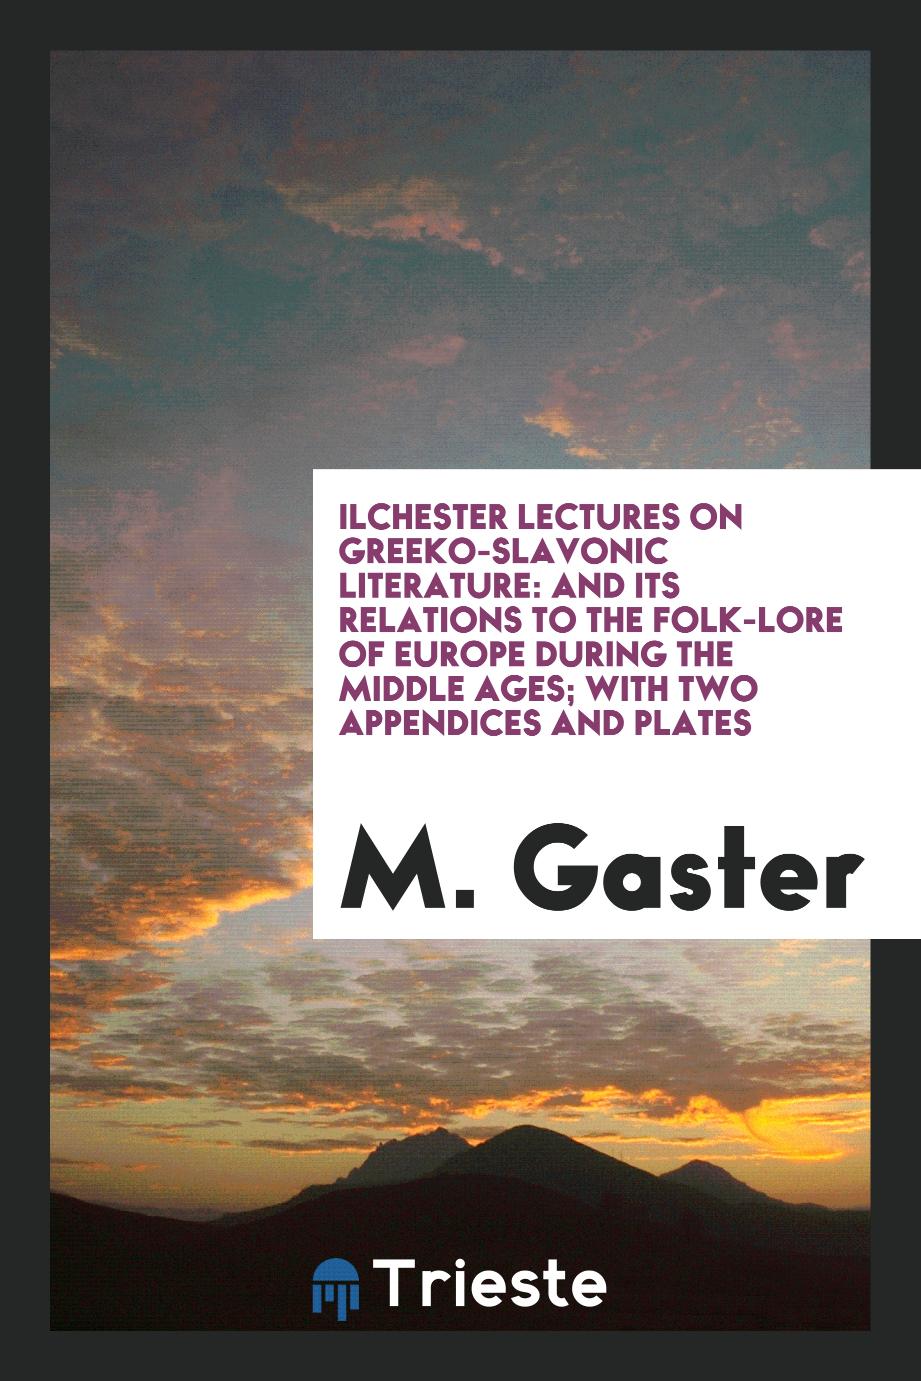 Ilchester lectures on Greeko-Slavonic literature: and its relations to the folk-lore of Europe during the middle ages; with two appendices and plates